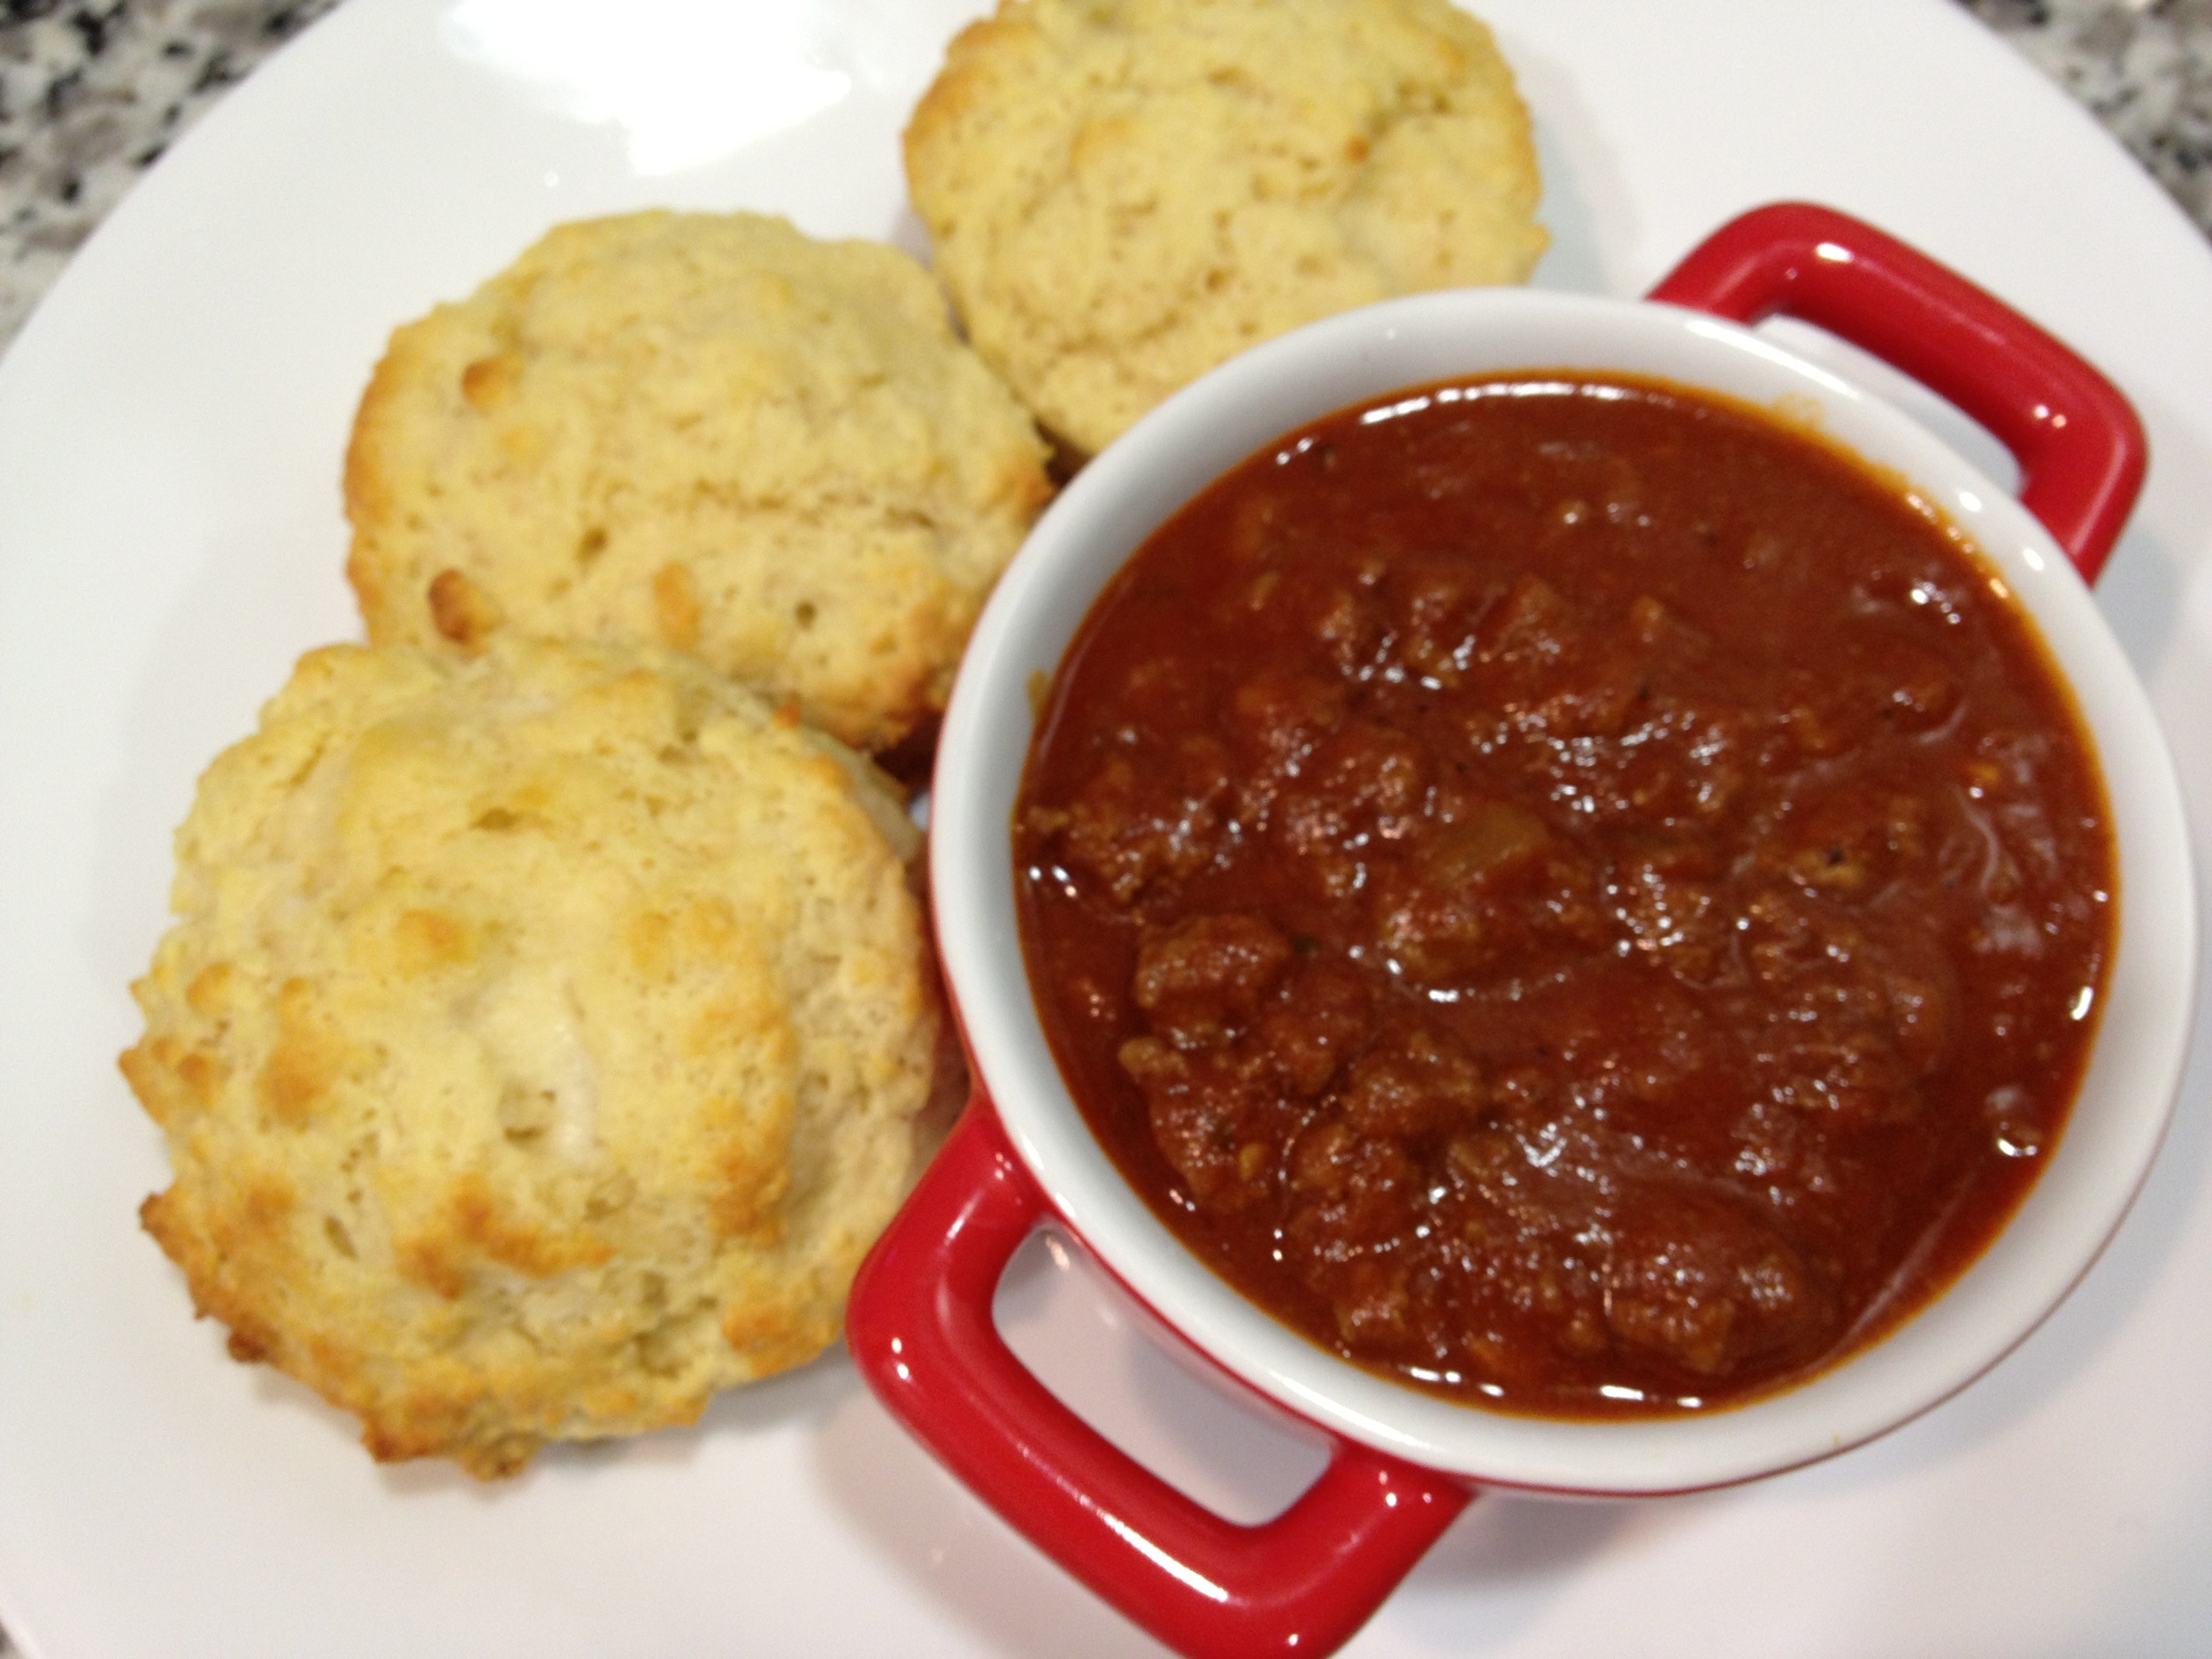 Homemade Chili and Buttermilk Biscuits